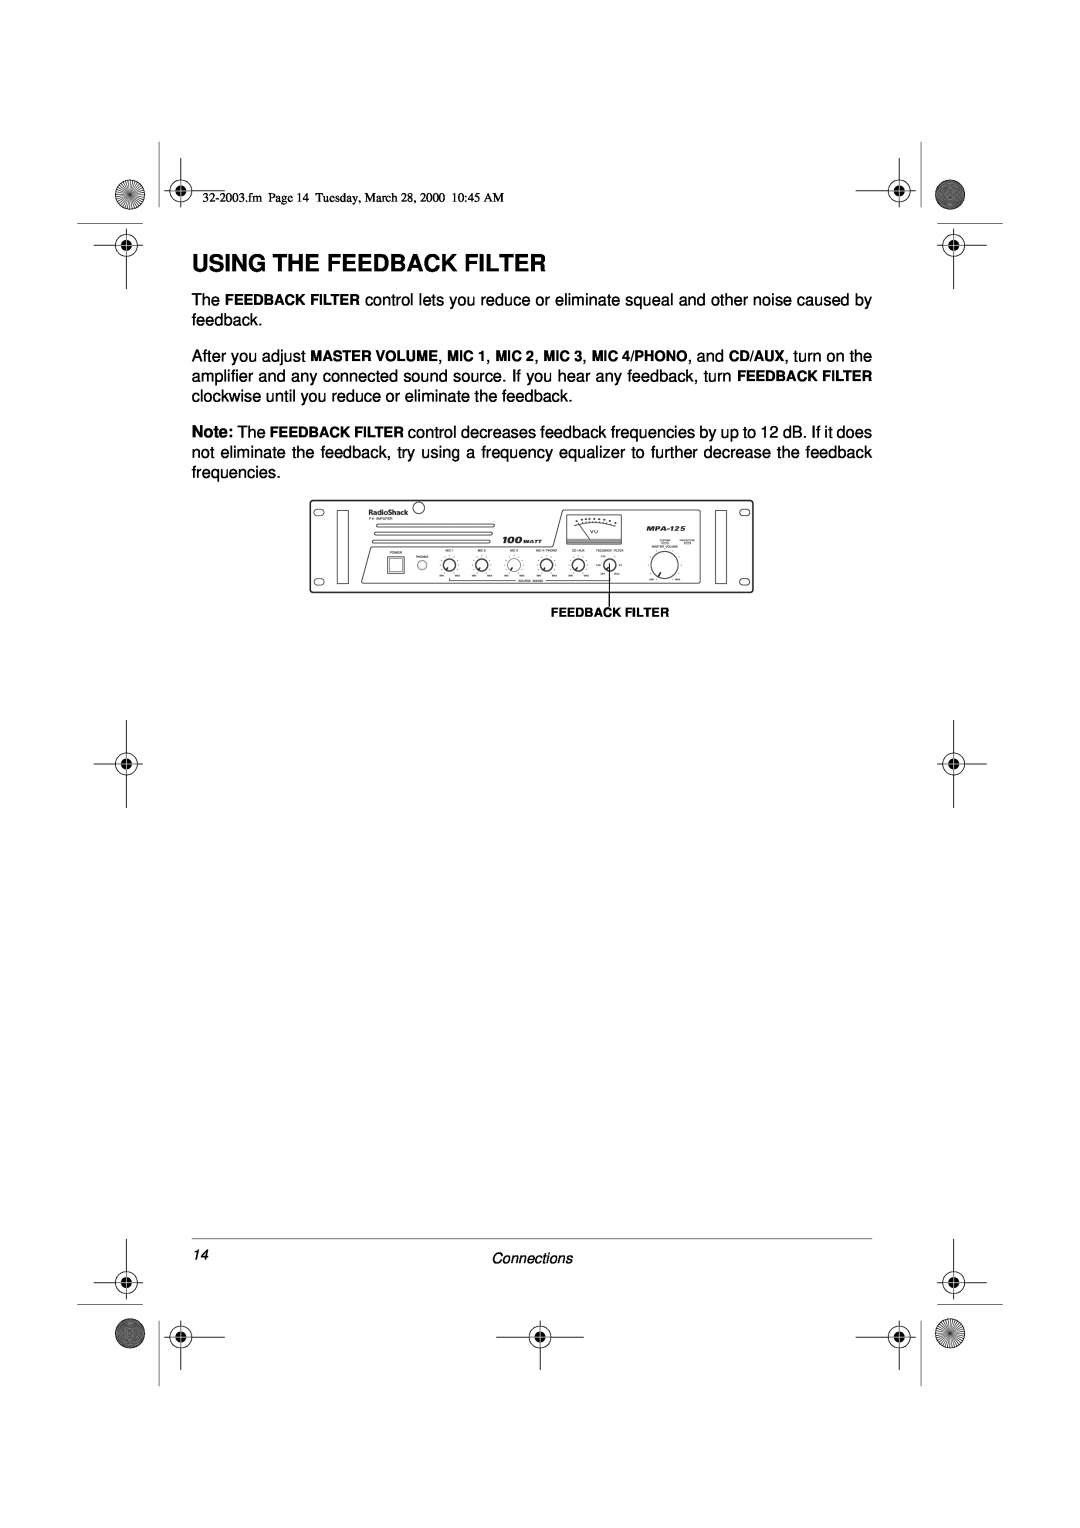 Radio Shack MPA-125 owner manual Using The Feedback Filter, Connections 